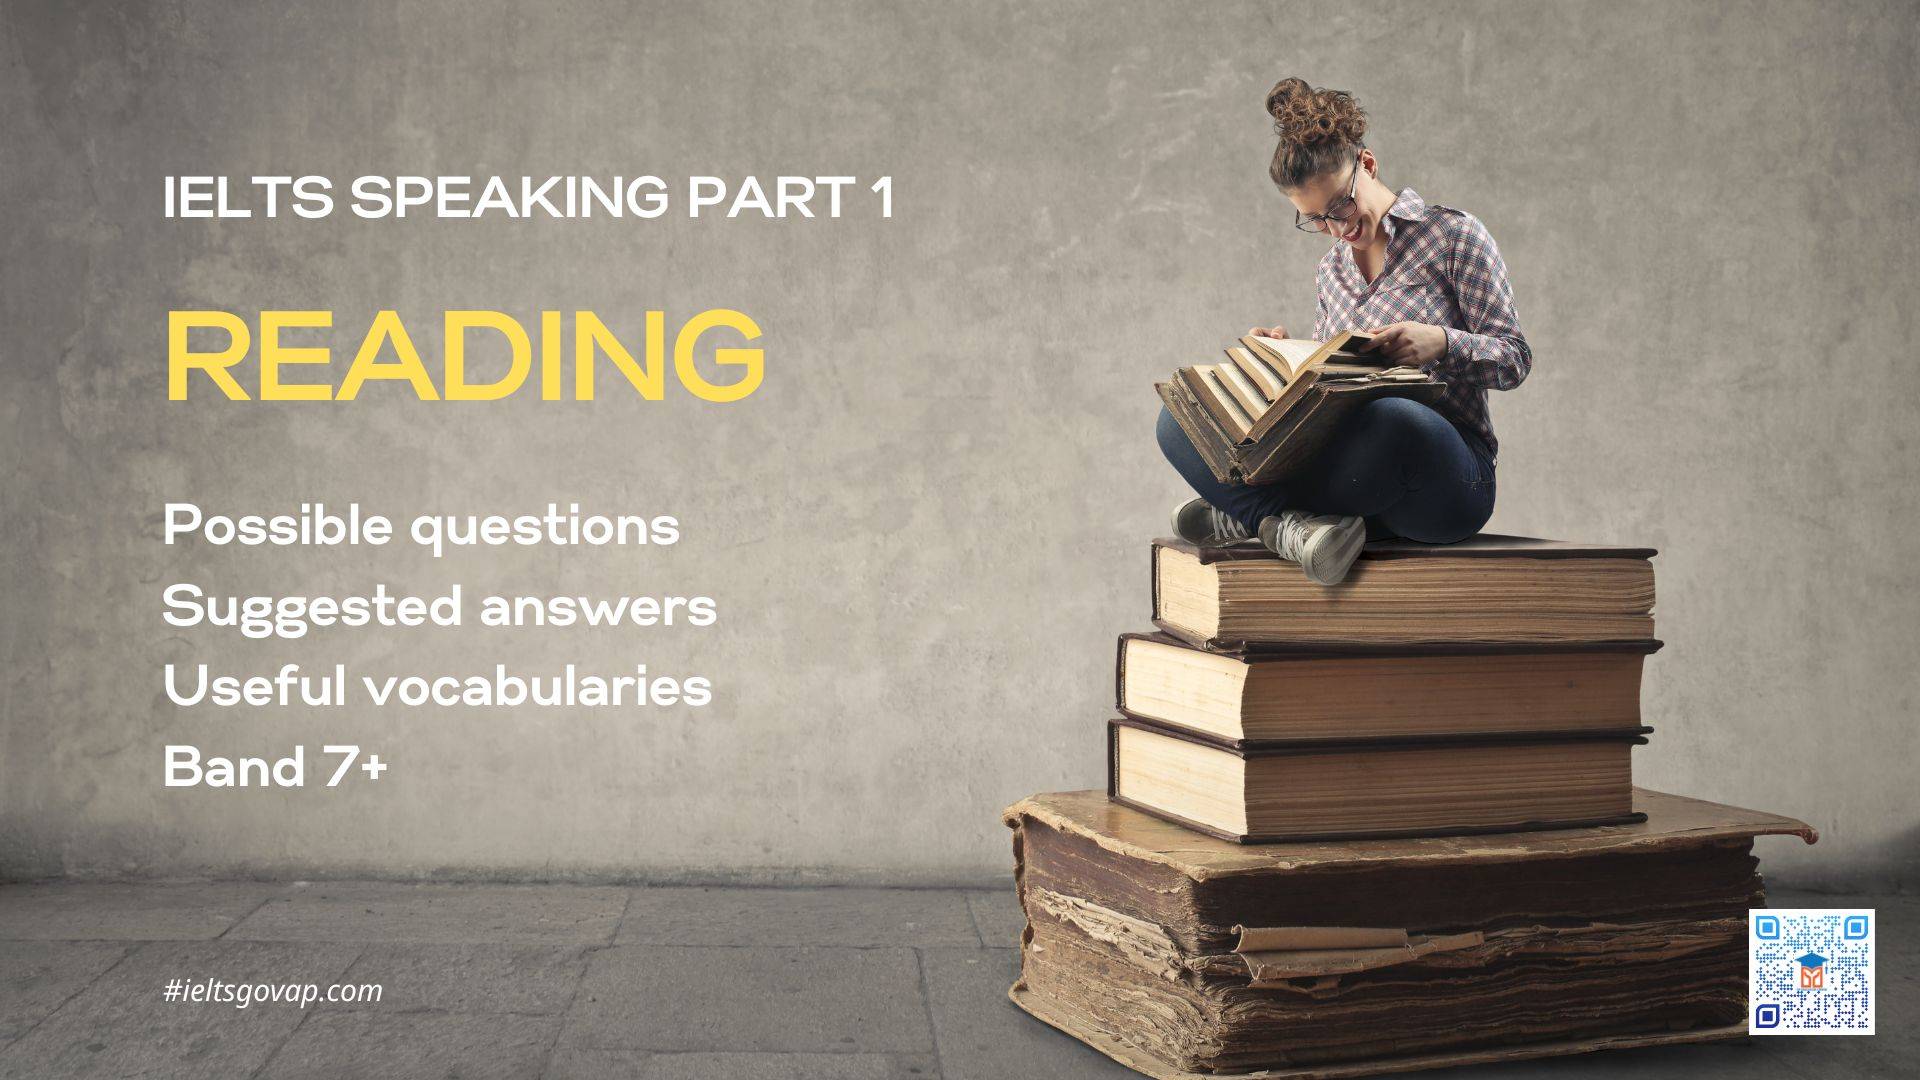 Ielts Speaking Part 1: Topic Reading